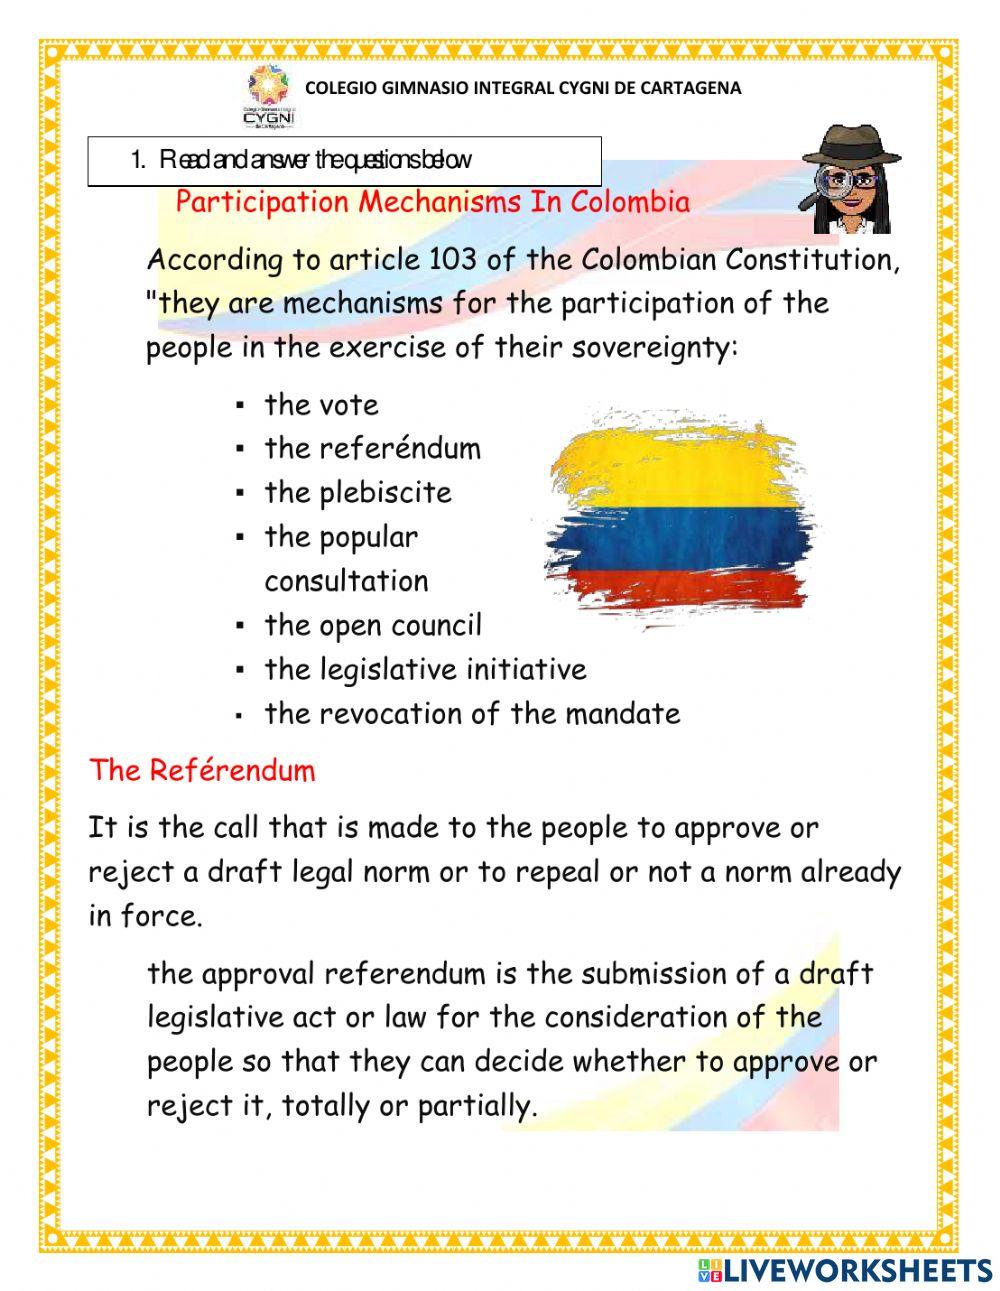 Participation Mechanisms In Colombia